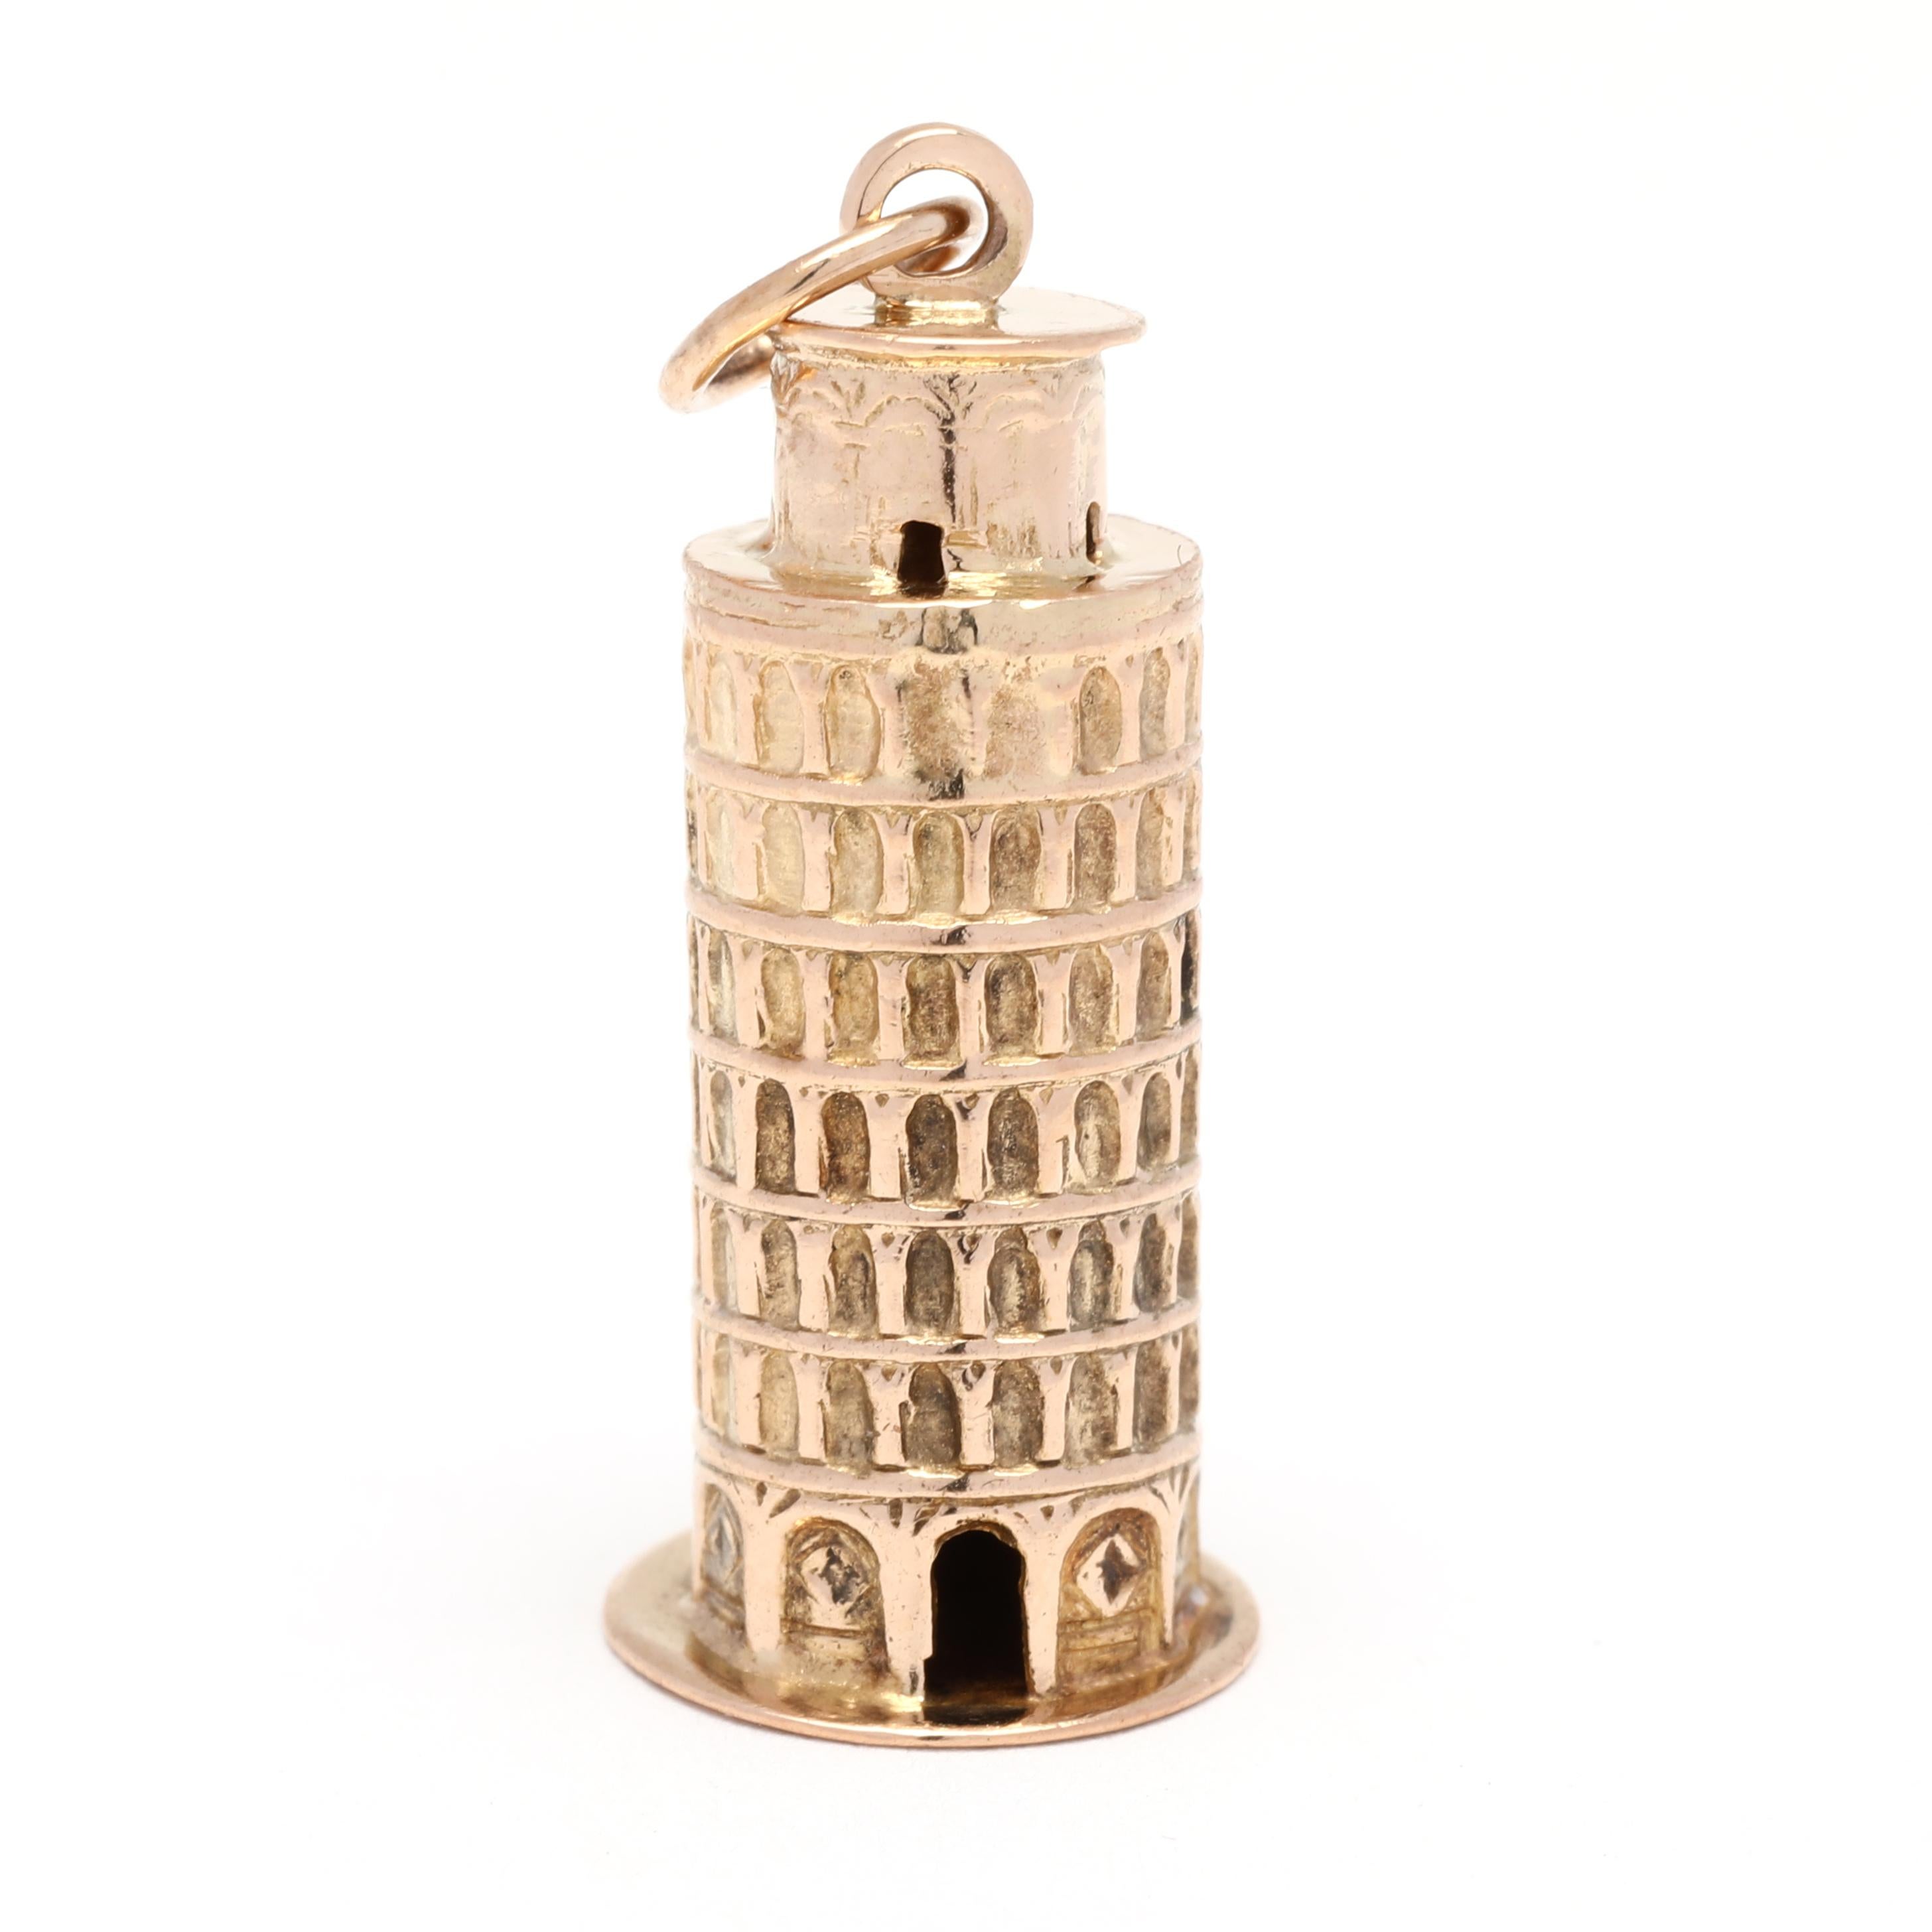 Women's or Men's Leaning Tower of Pisa Charm, 18k Yellow Gold, Small Gold Leaning